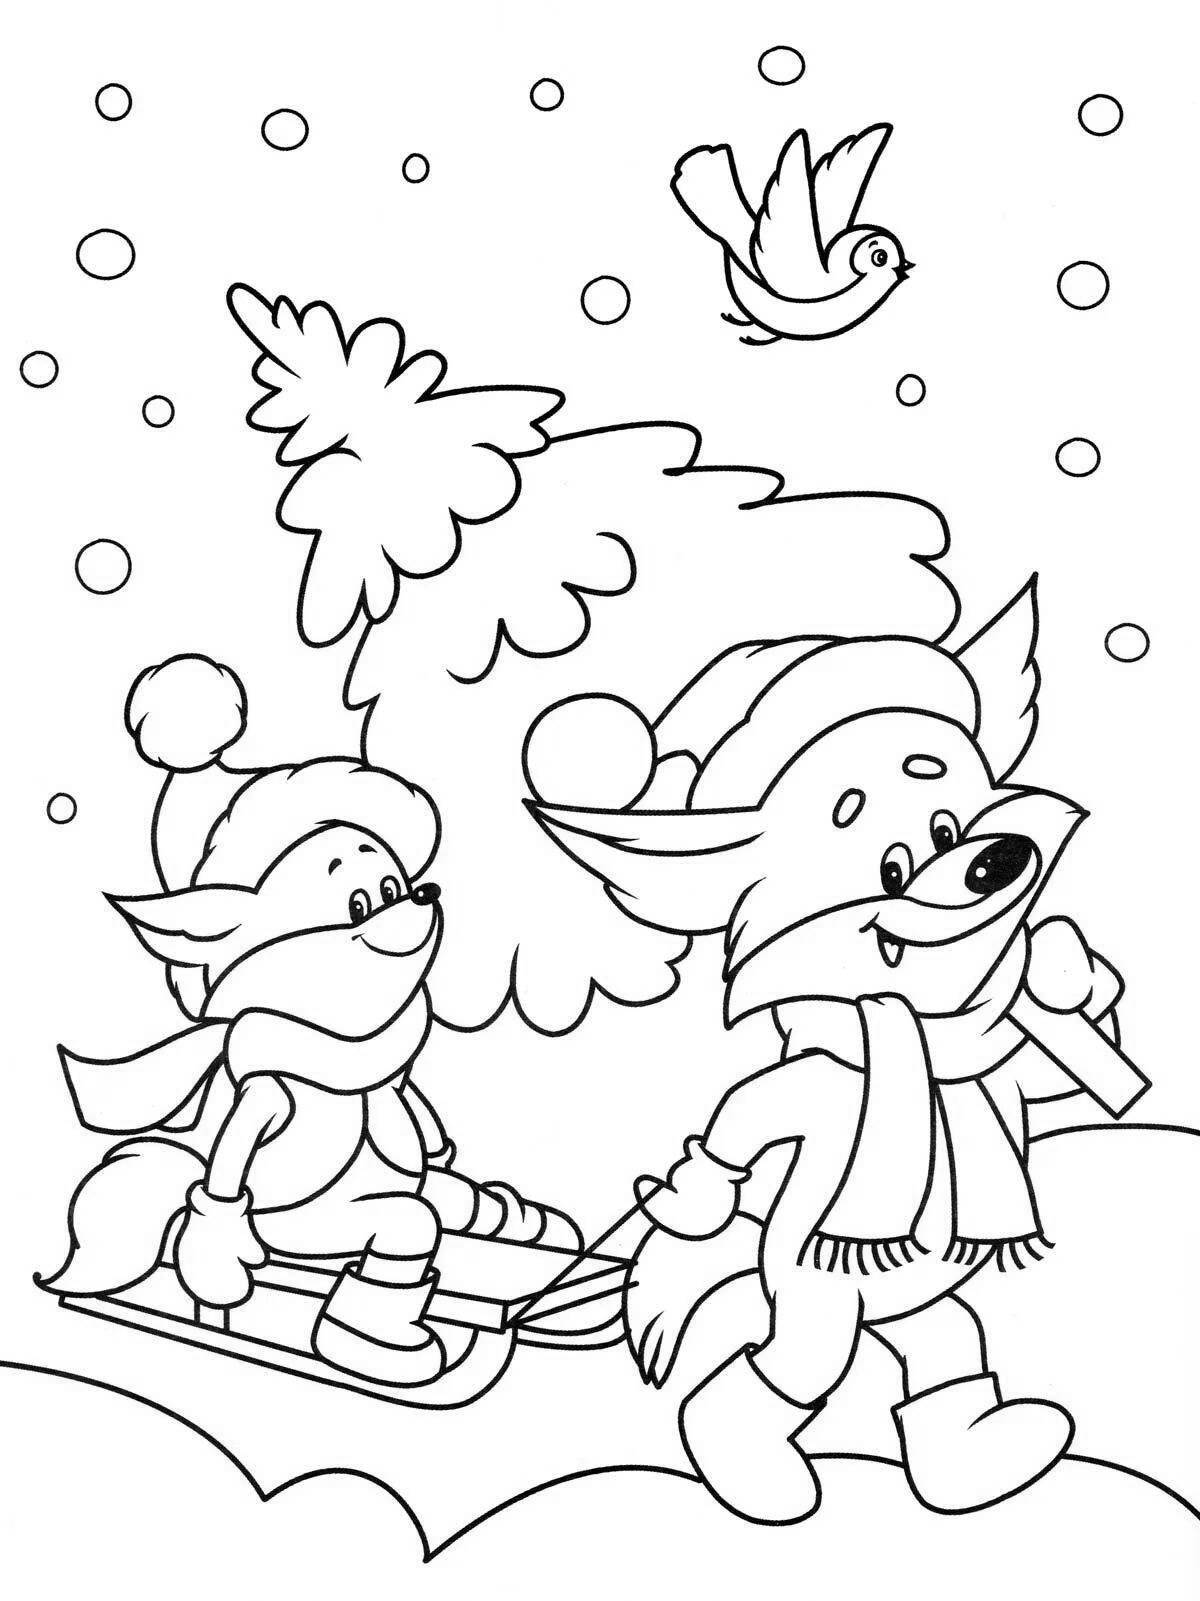 Glittering winter coloring book for kids